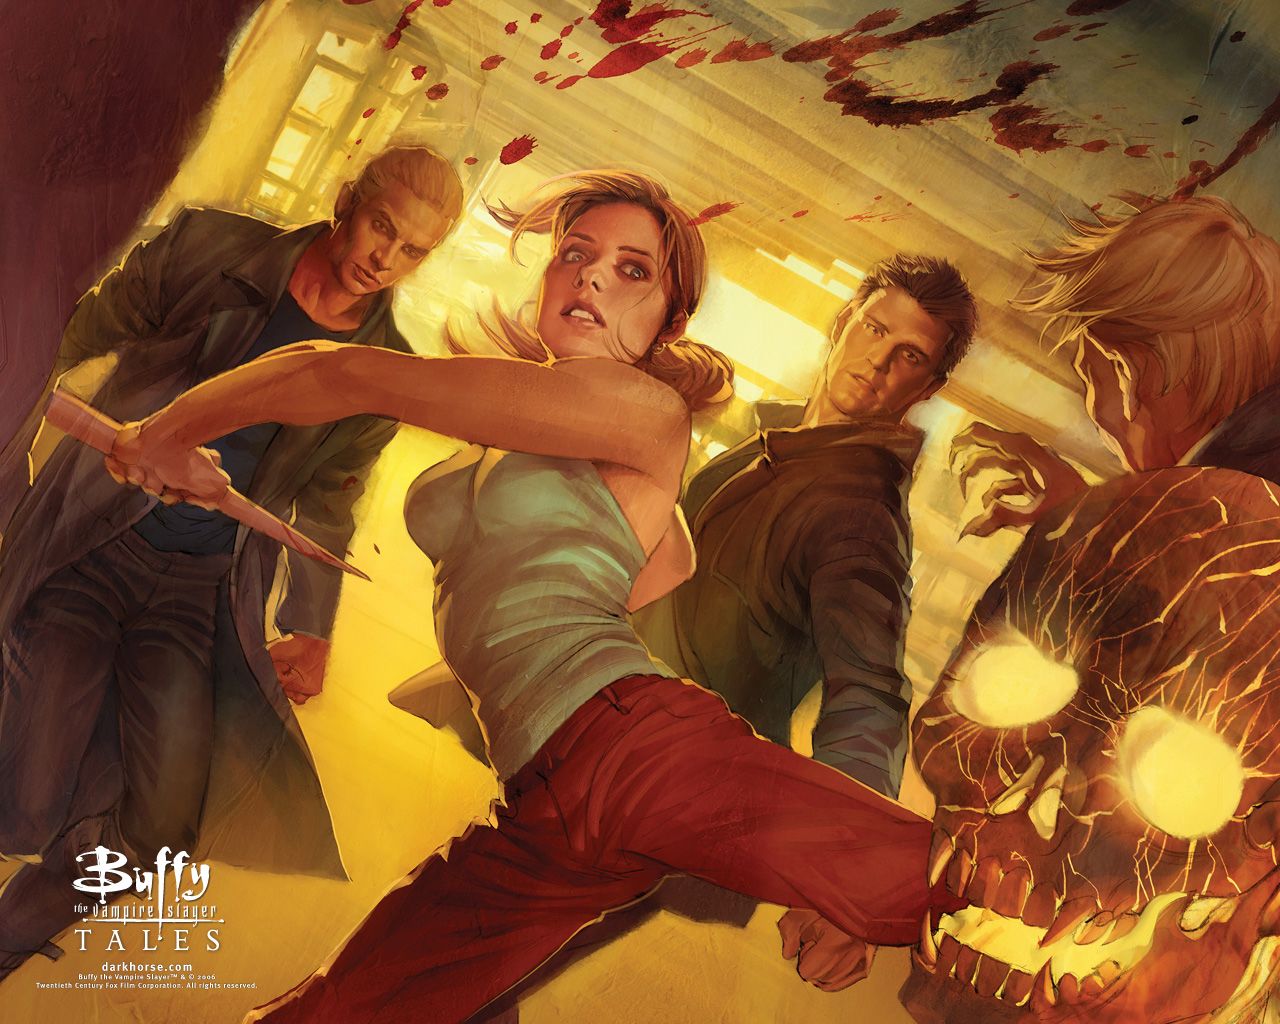 Dark Horse comics' Buffy the Vampire Slayer made her first appearance in 1998. 